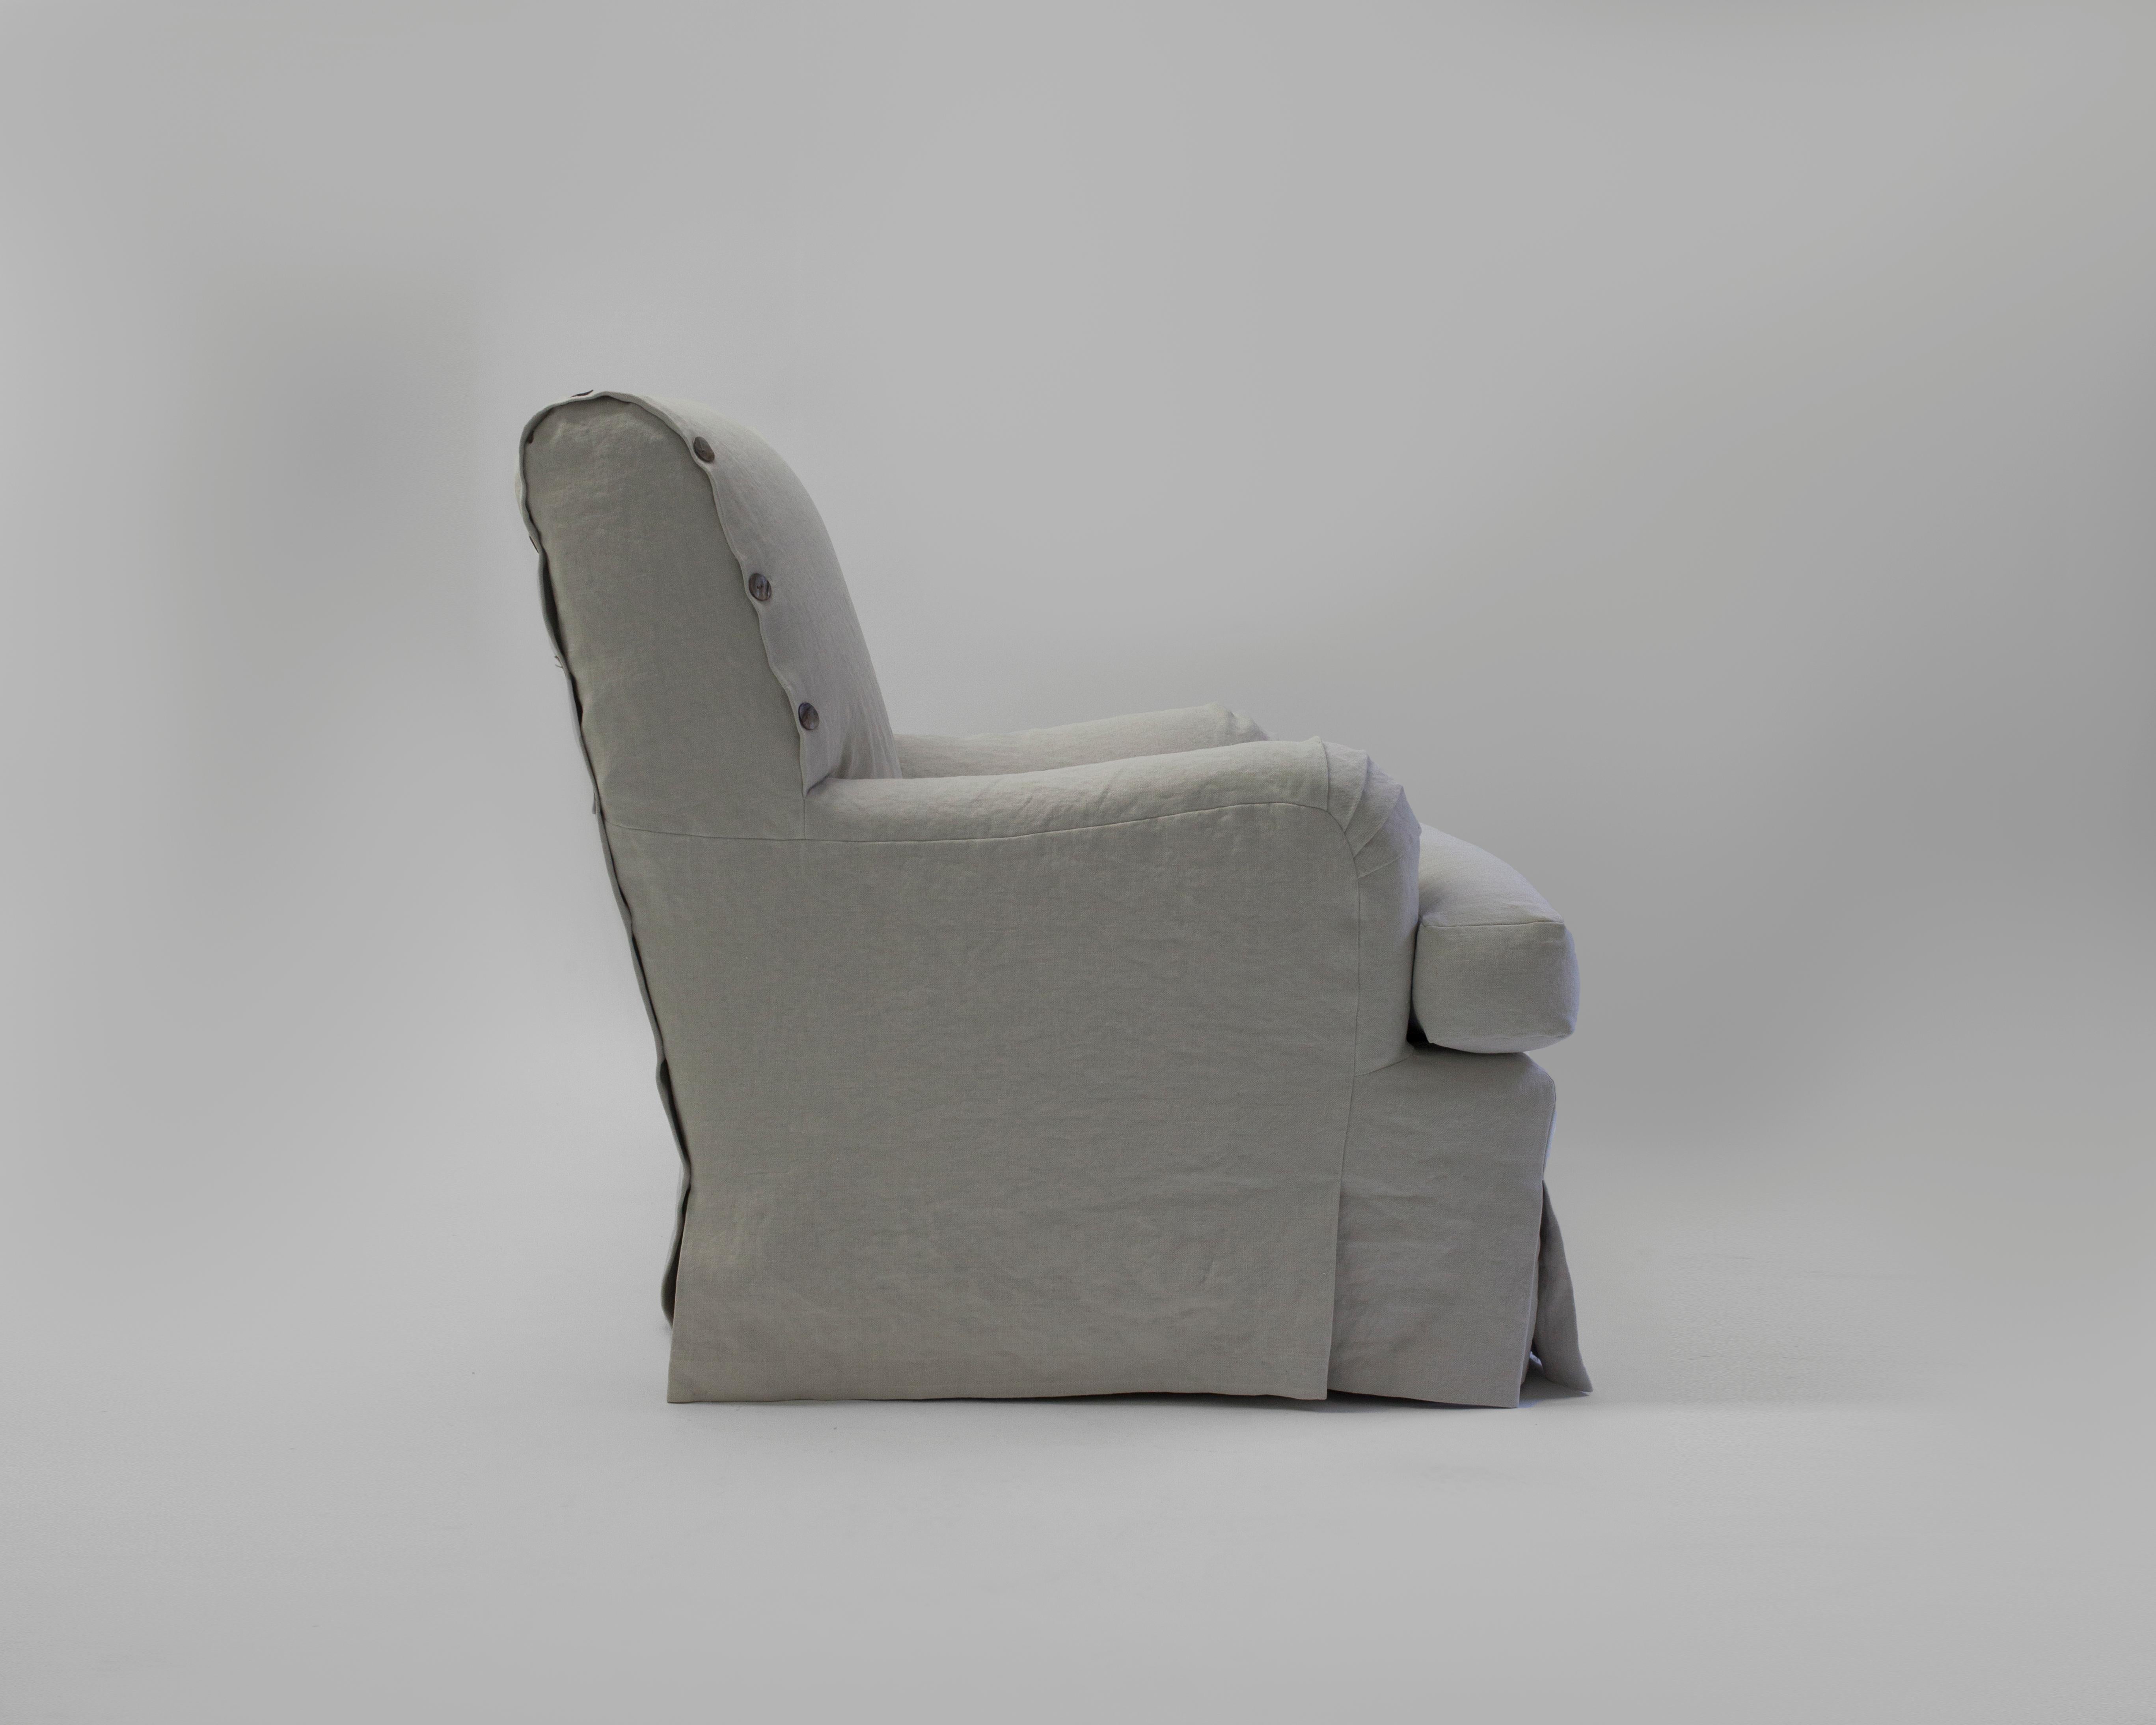 The Coteau club chair is a comfortable and relaxed look - the slipcover has special button closure which also gives a distinct view from back of club chair - hair filled scroll back and saddle arms with a feather and down loose seat cushion. Shown